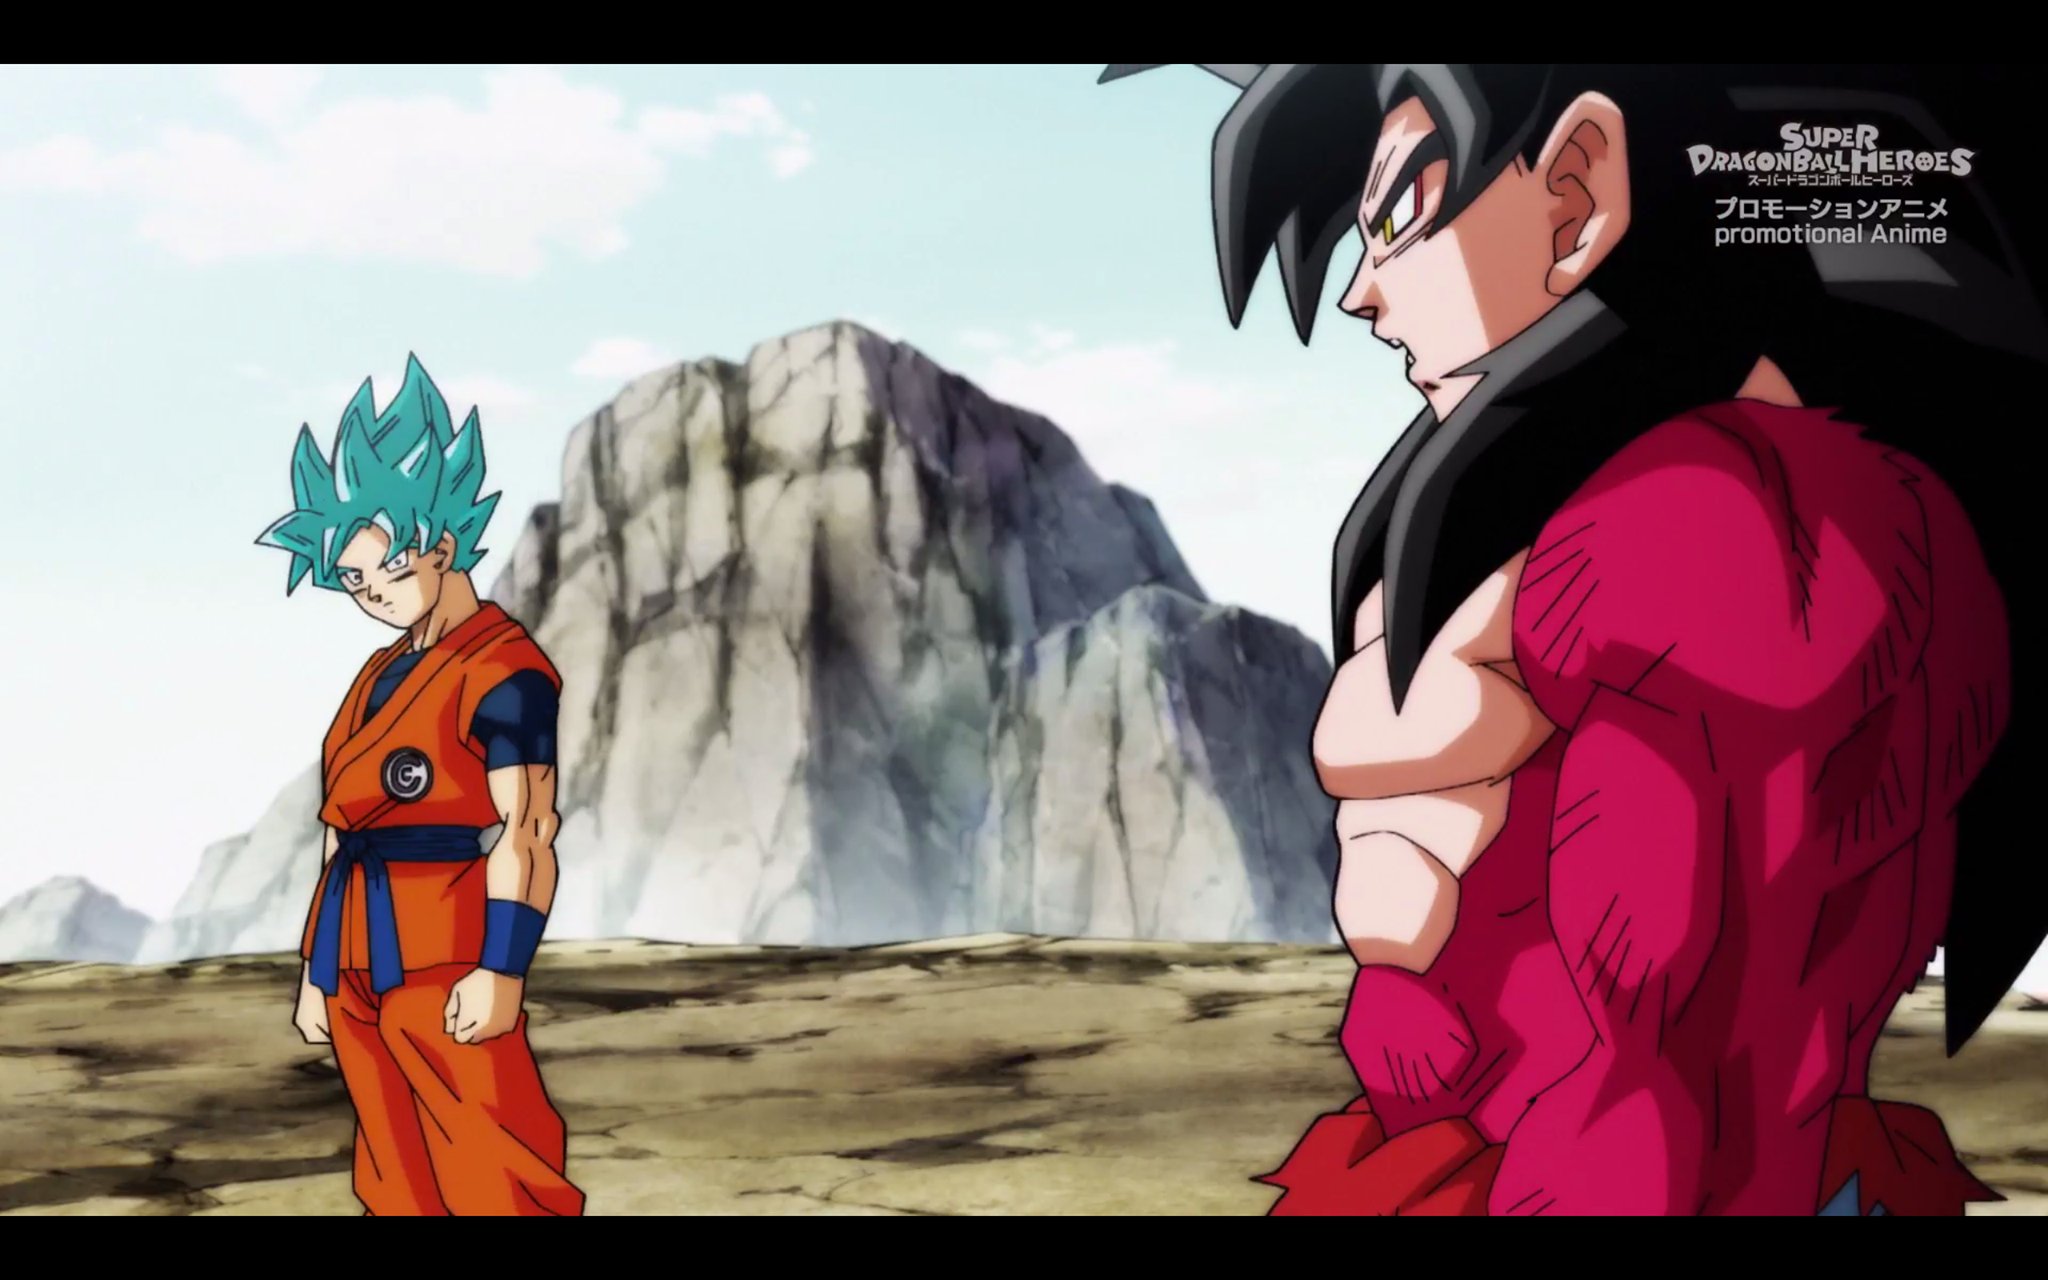 “Aint even gonna lie I think making Dragon Ball Heroes this short Promo ani...